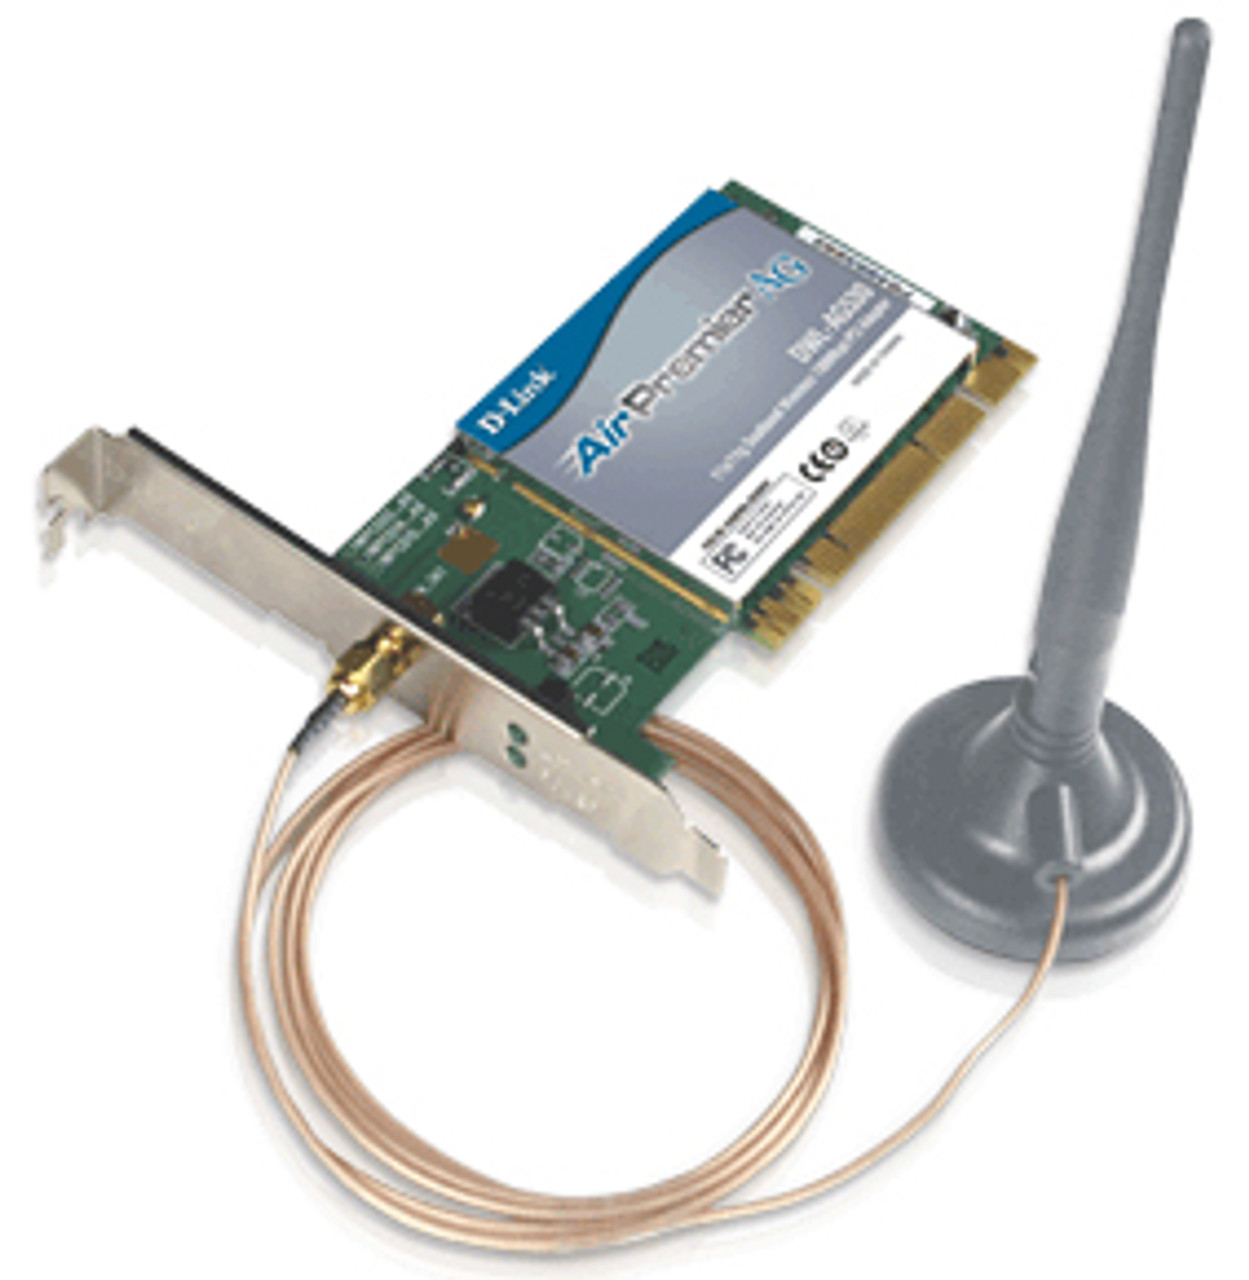 DLDWLAG530 D-Link 108 Mbps Tri Band Pci Bus Adapter